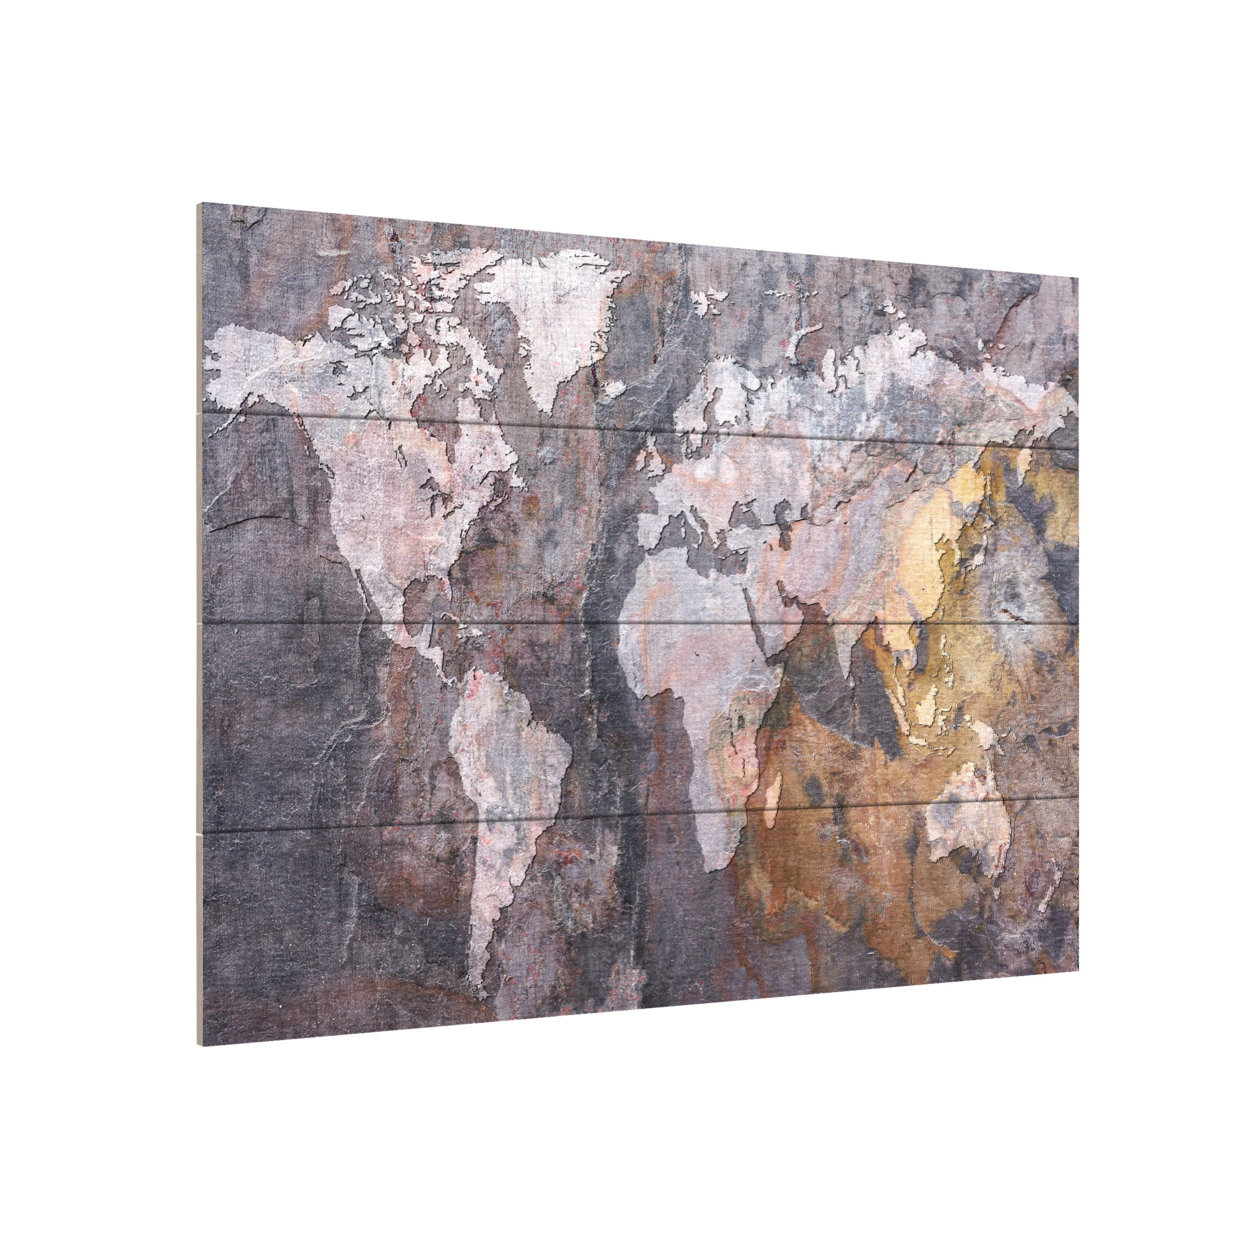 Wall Art 12 X 16 Inches Titled World Map - Rock Ready To Hang Printed On Wooden Planks